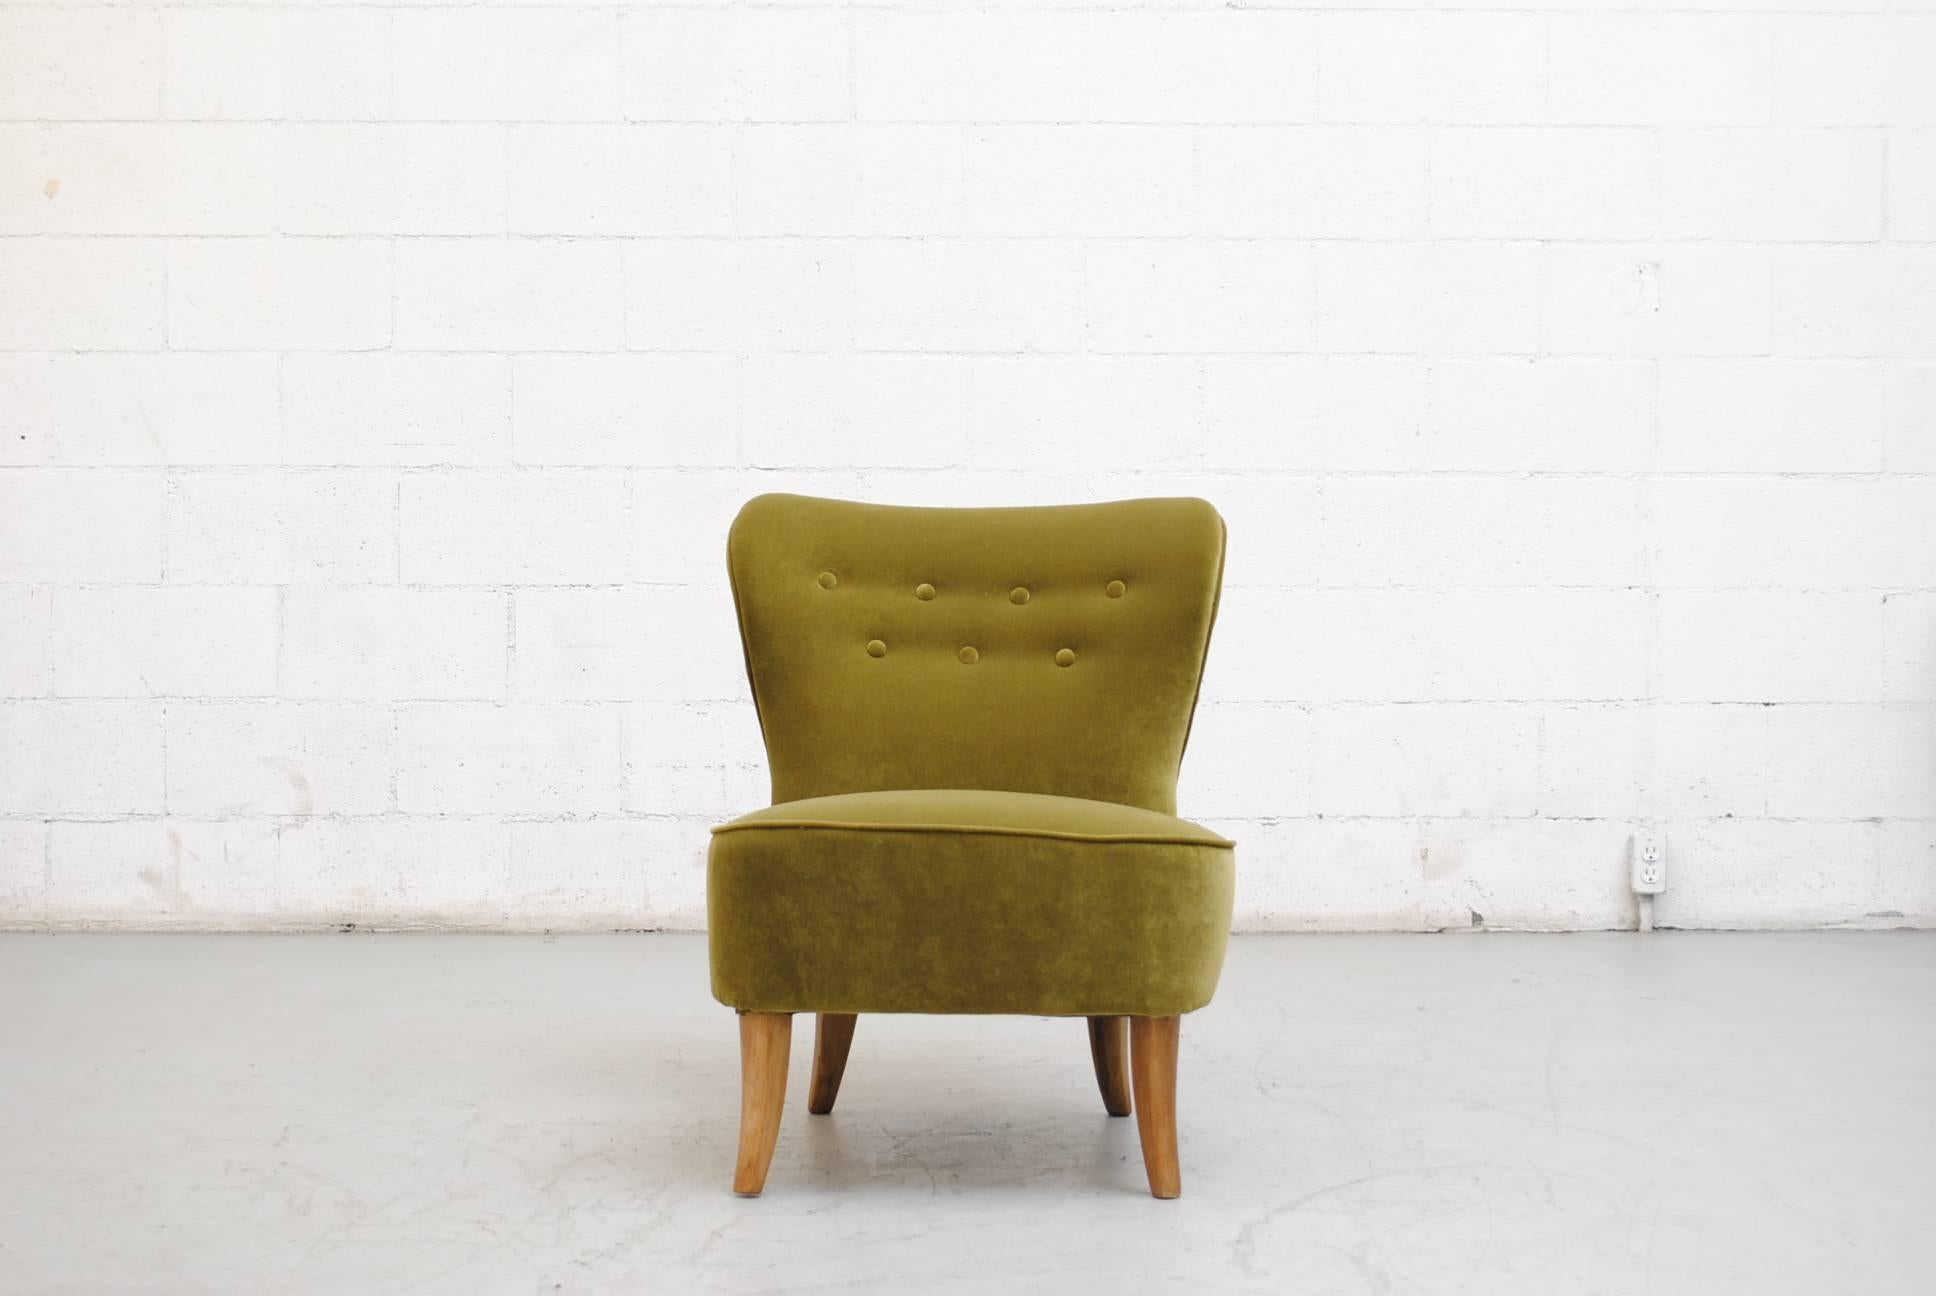 Dragon green armless Theo Ruth lounge chair for Artifort. Newly upholstered with lightly refinished legs.